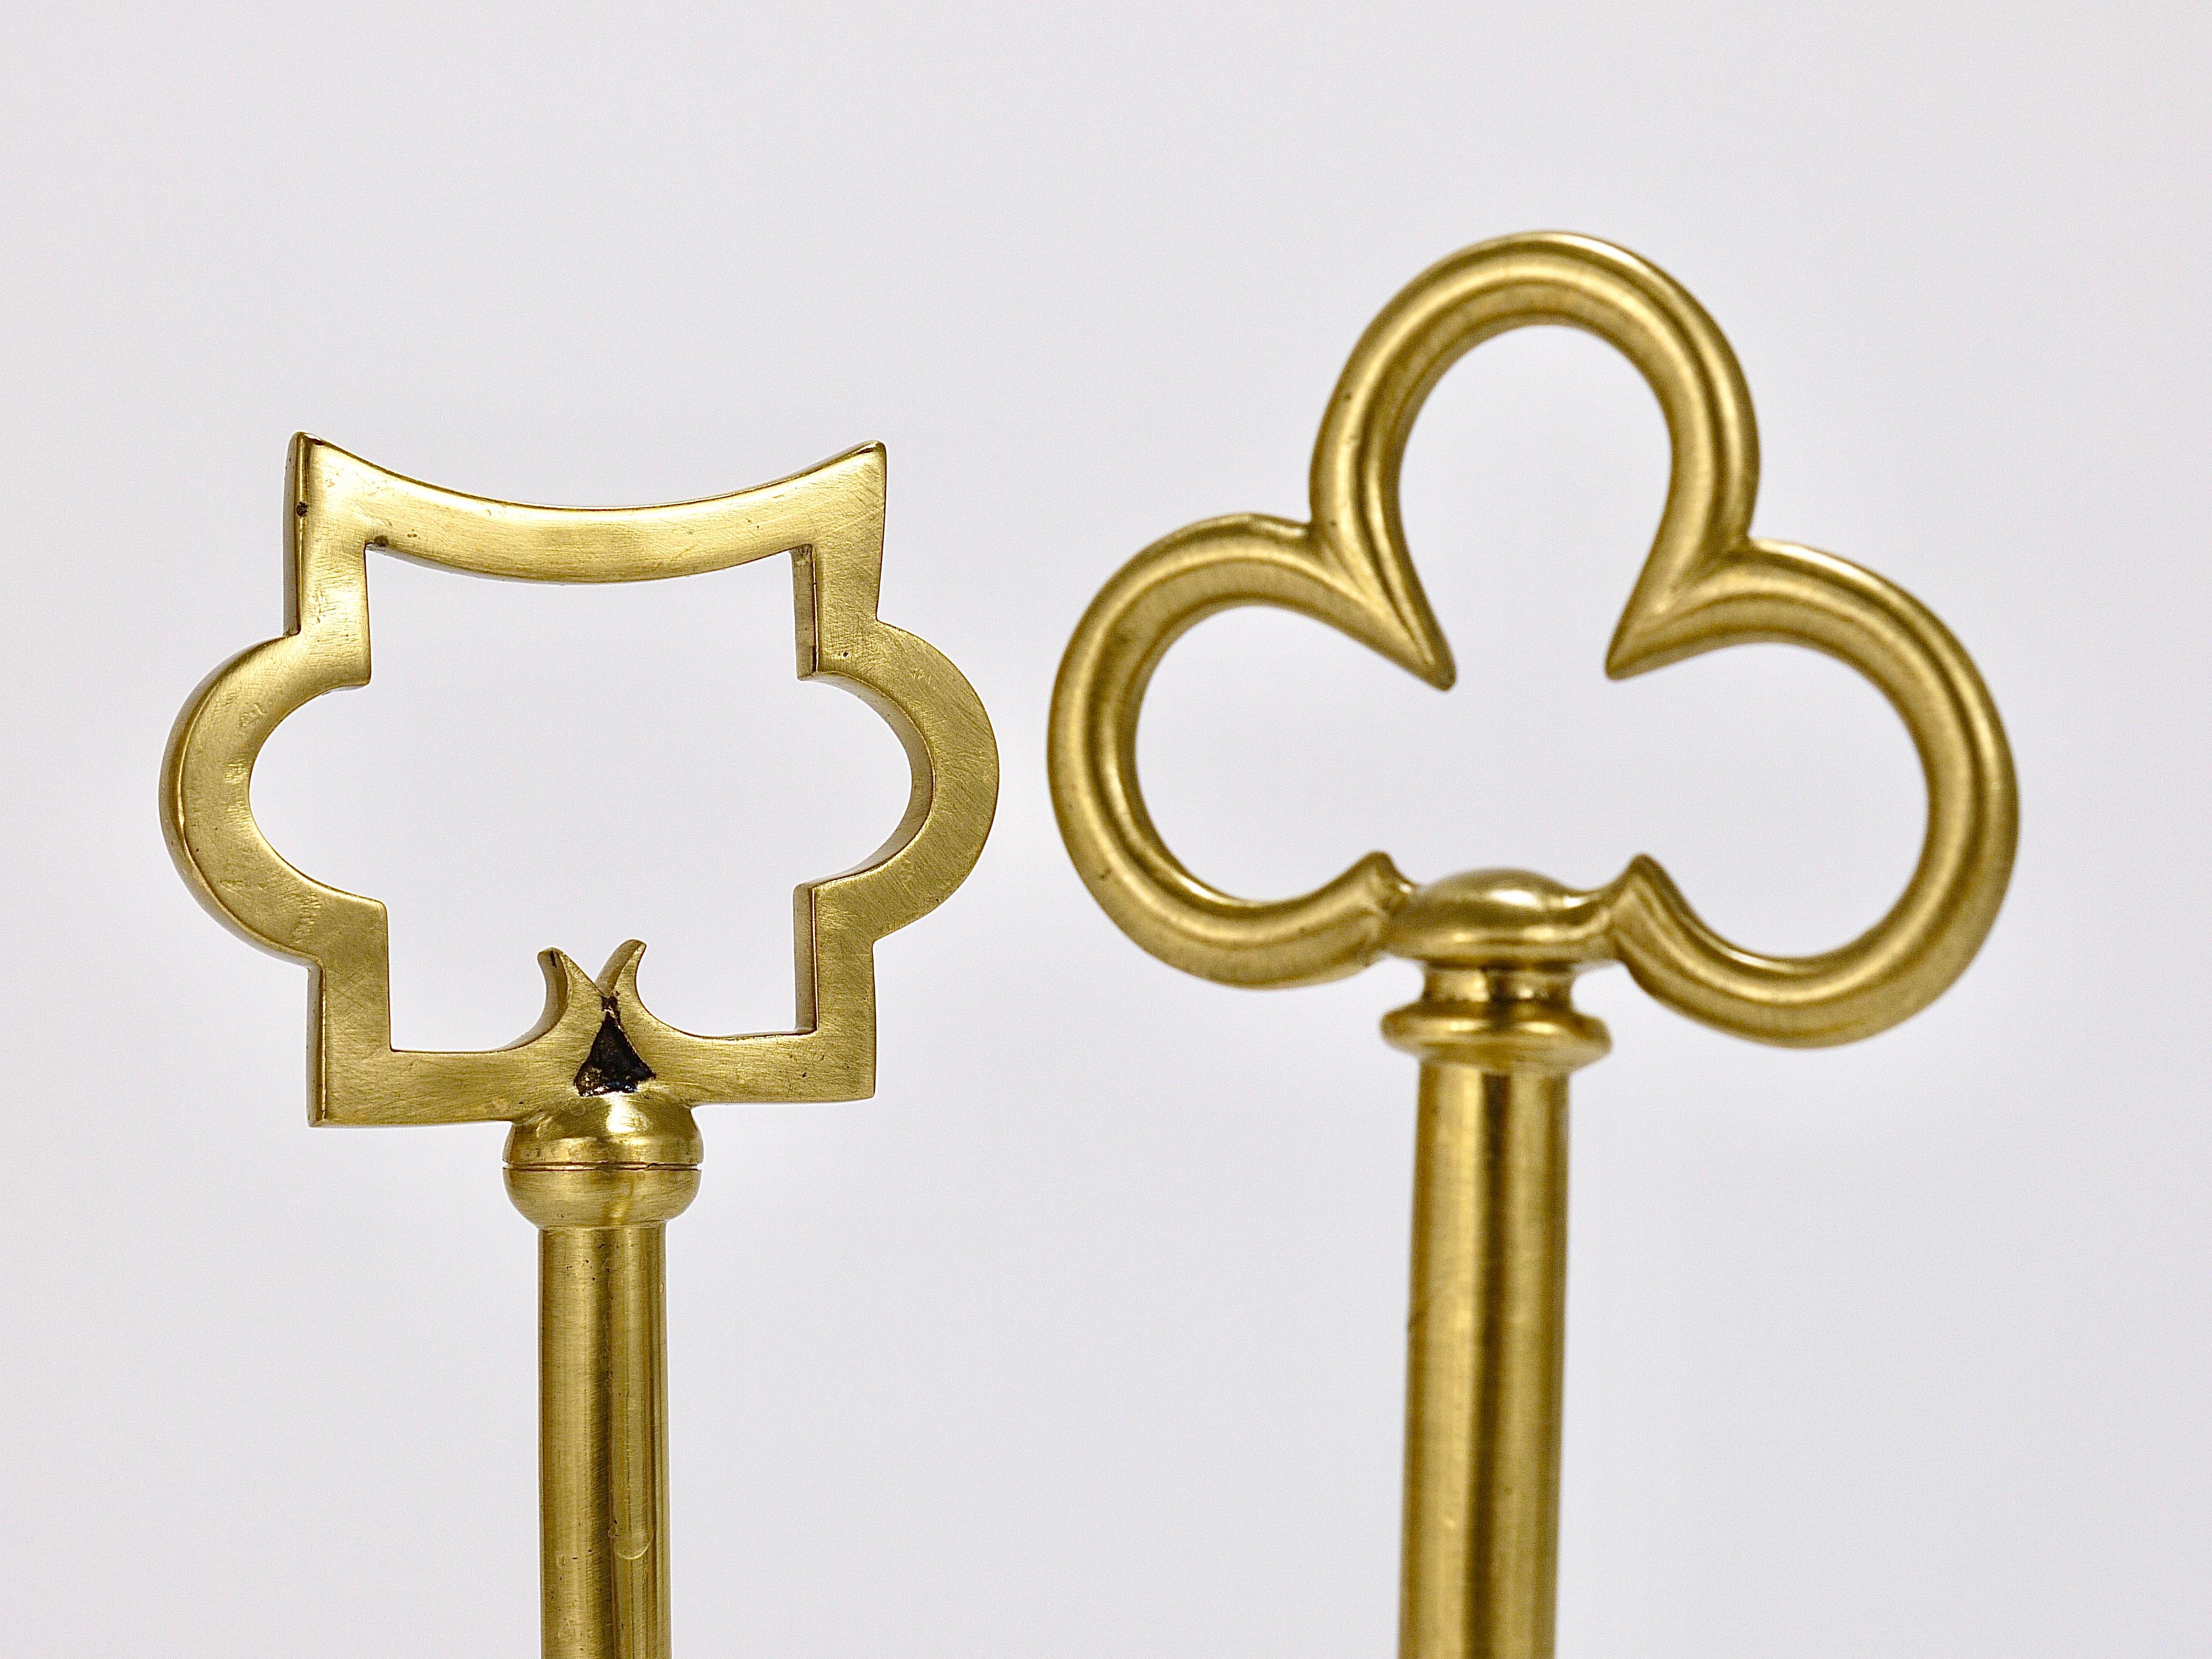 Sculptural Austrian Midcentury Brass Key Book Ends from the, 1950s For Sale 7